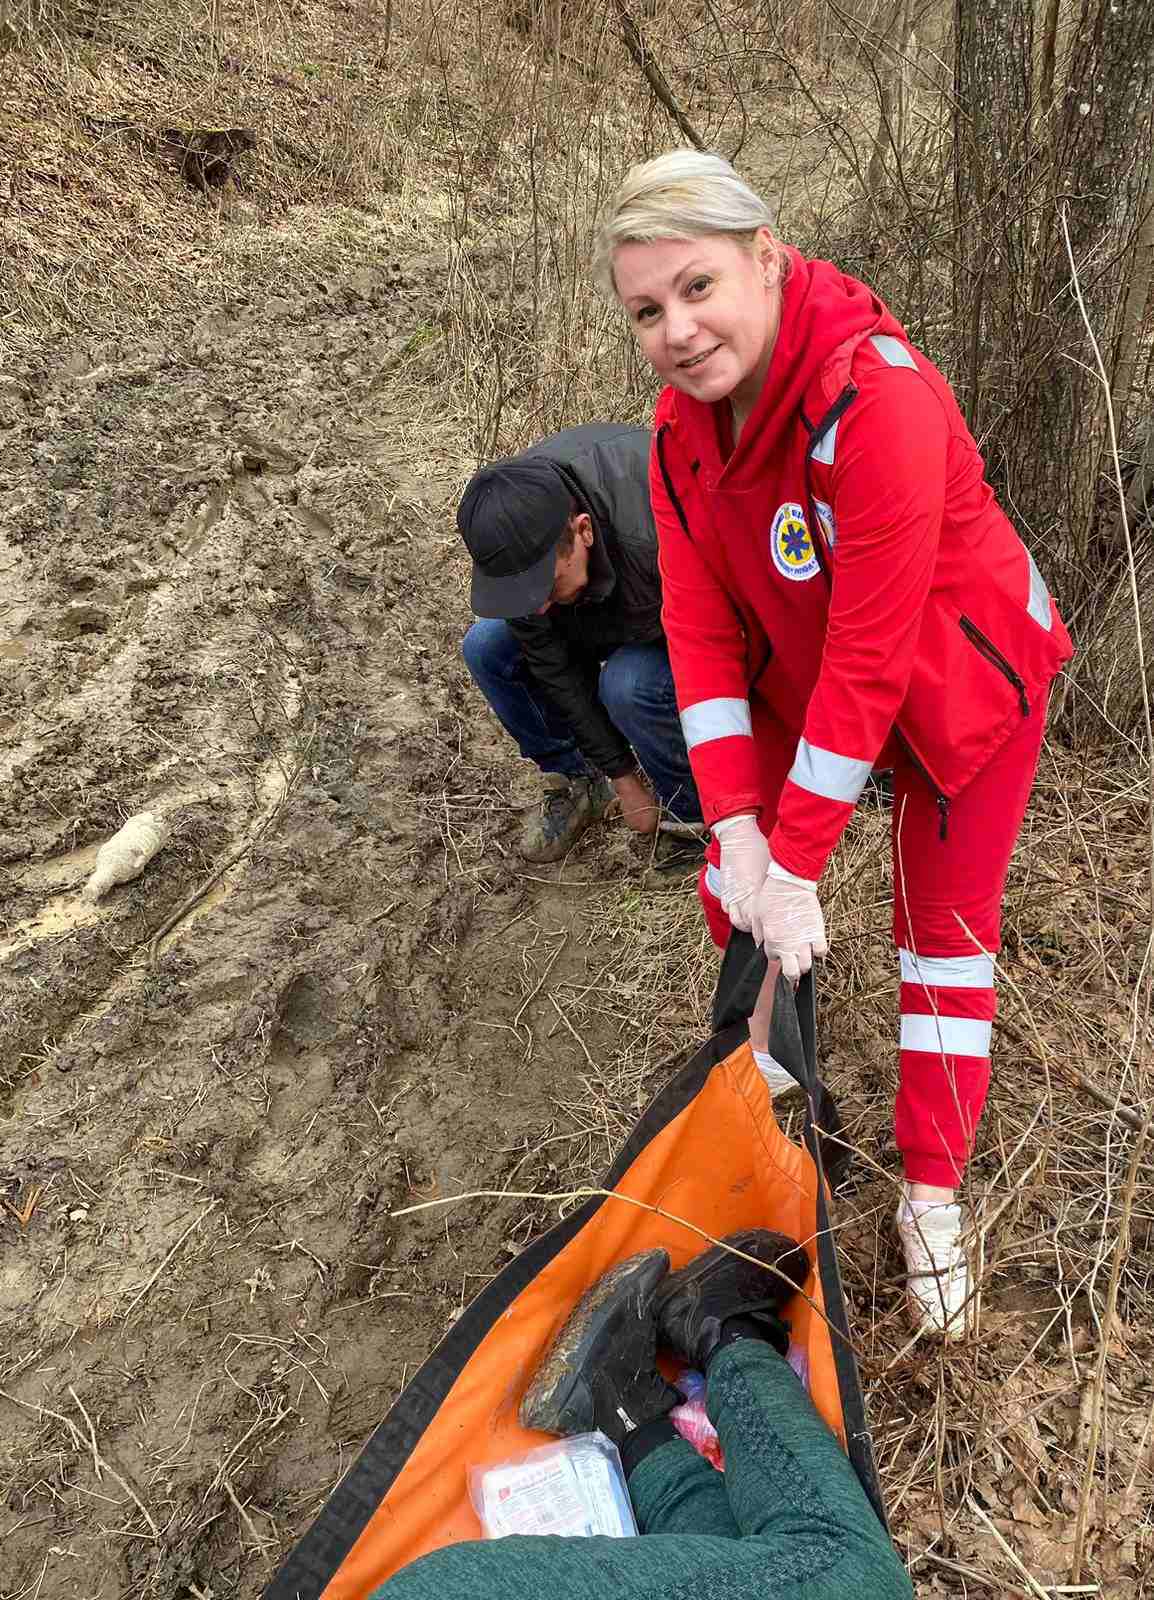 In Zakarpattia, a woman in labor from a remote area was carried on a stretcher